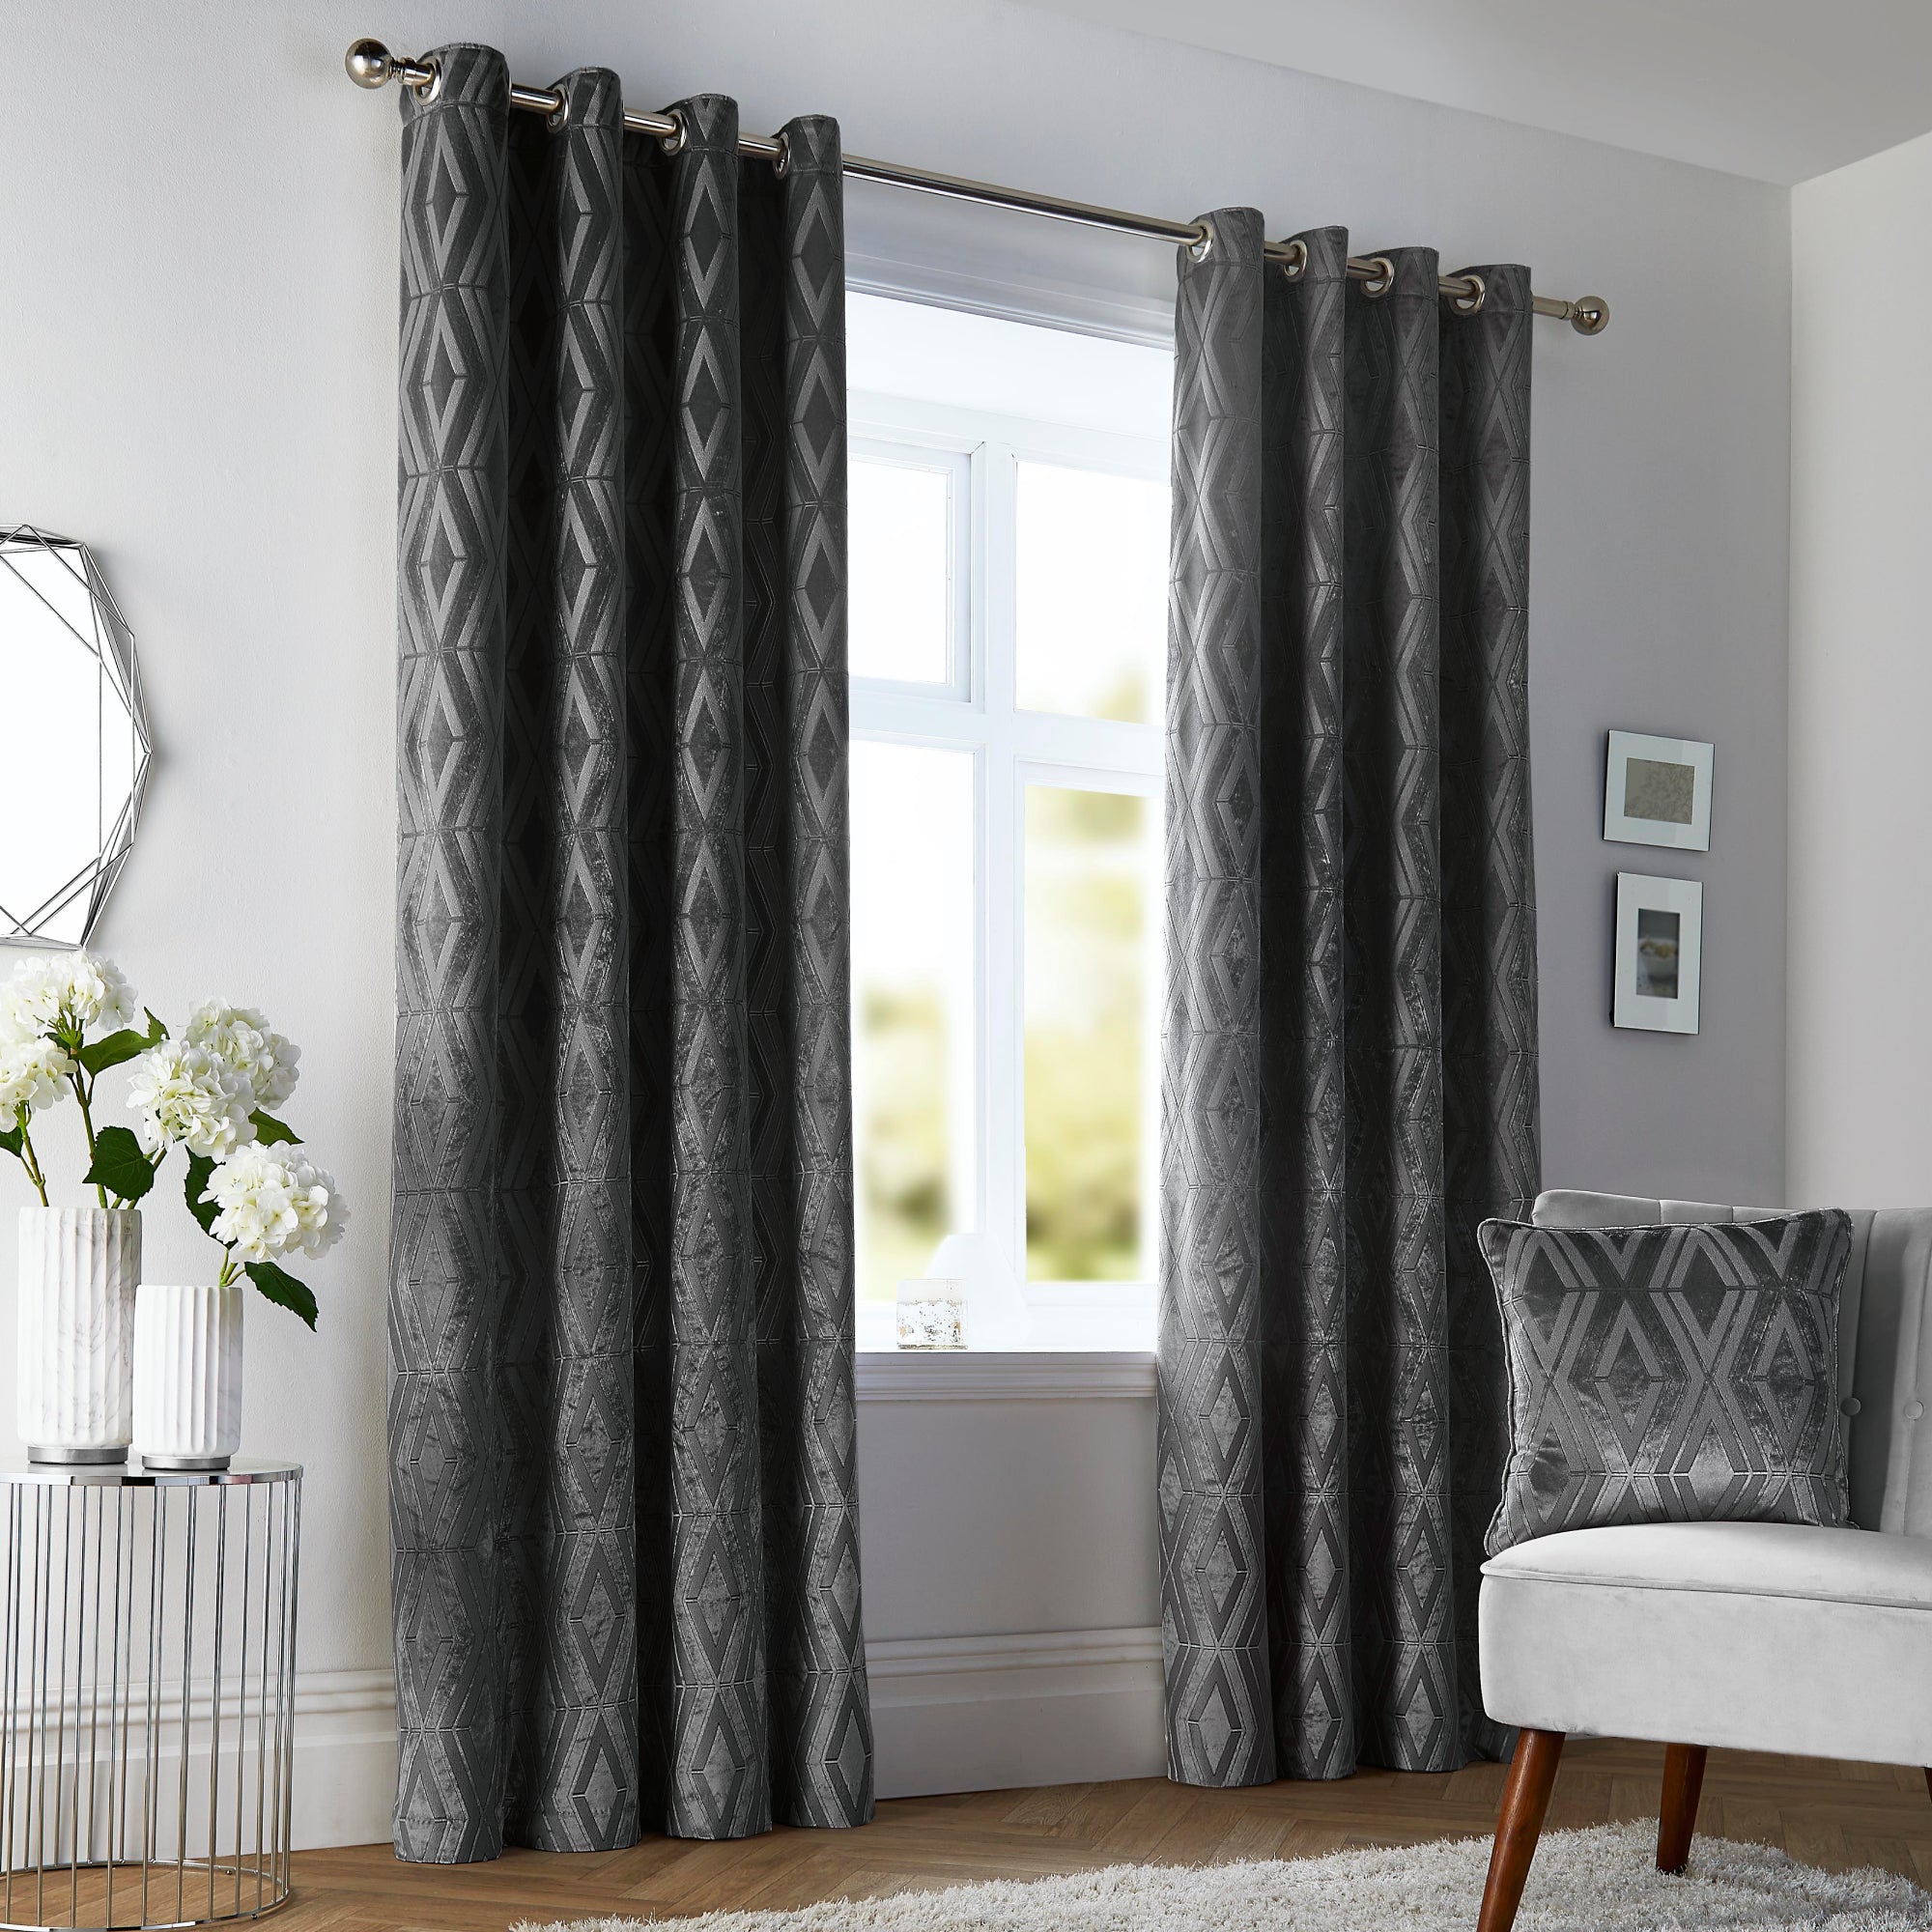 Pair of Eyelet Curtains Marco by Curtina in Slate